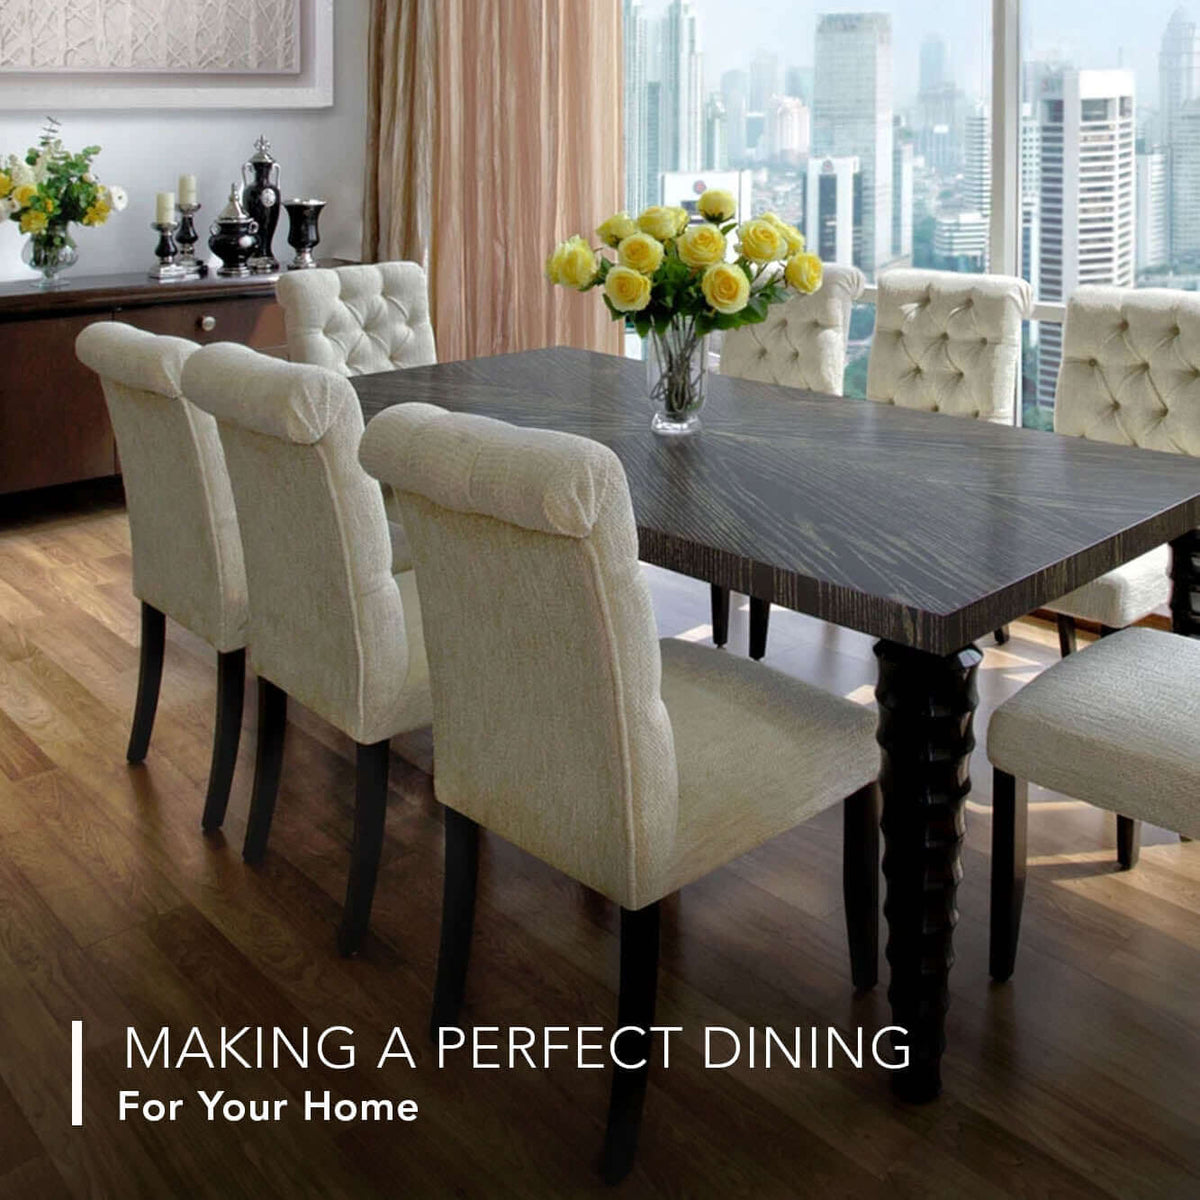 Making a Perfect Dining Room For Your Home